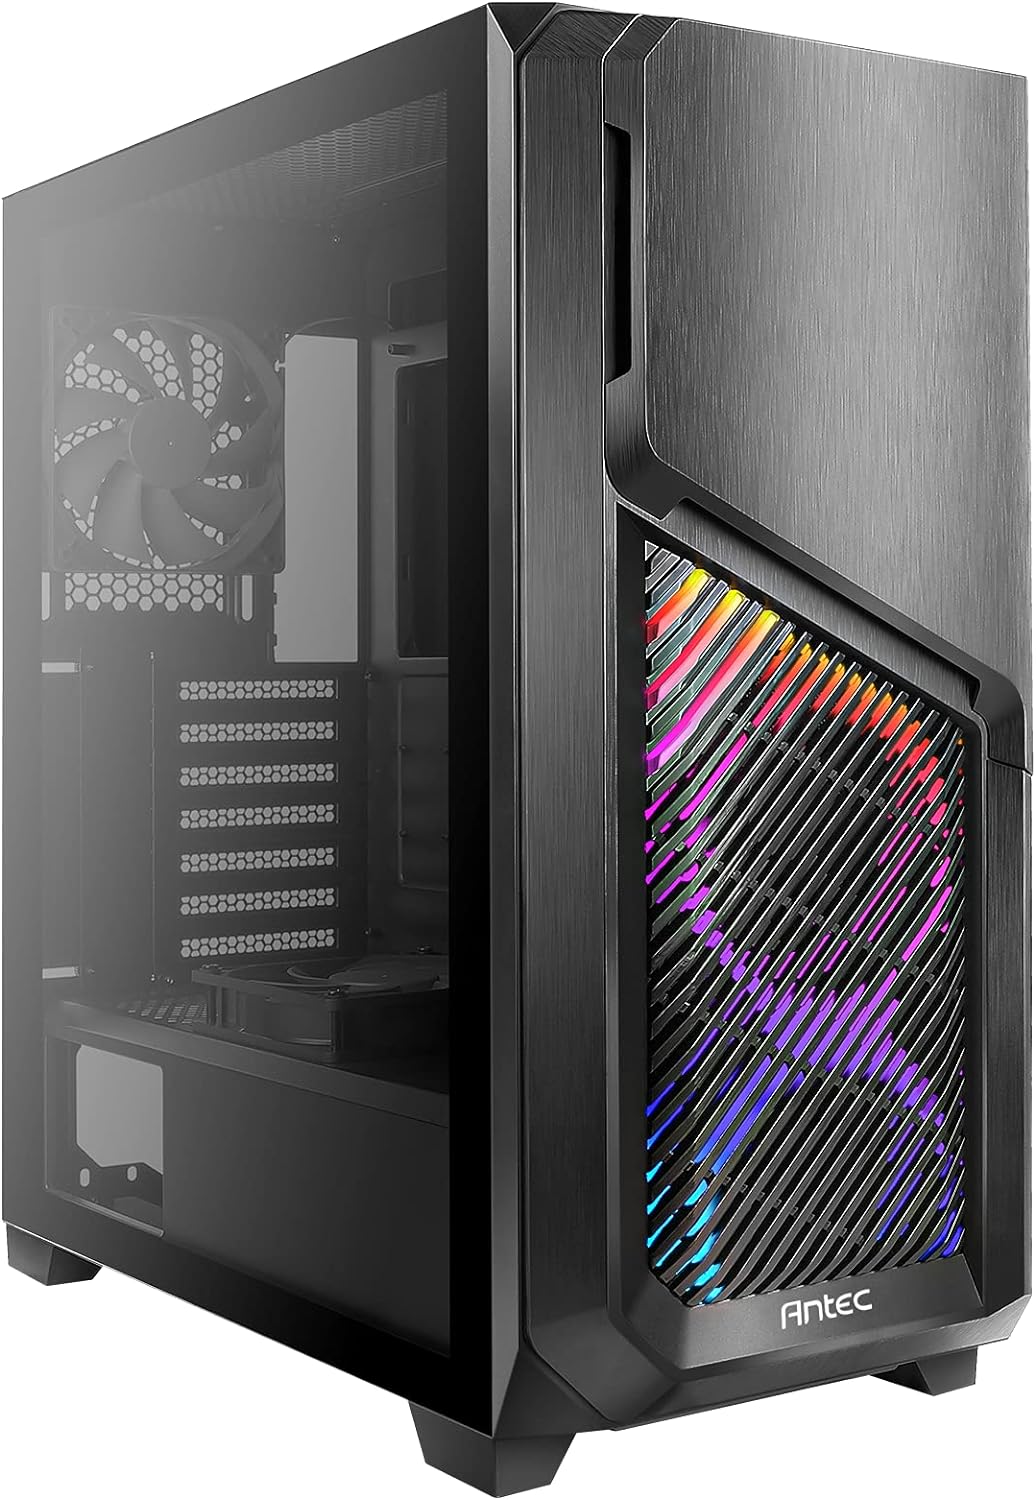 Antec Dark League DF700 Flux White, Mid Tower ATX Gaming Case, Flux Platform, 5 x 120mm Fans Included, ARGB  PWM Fan Controller, Tempered Glass Side Panel, High-Airflow Mesh Front Panel